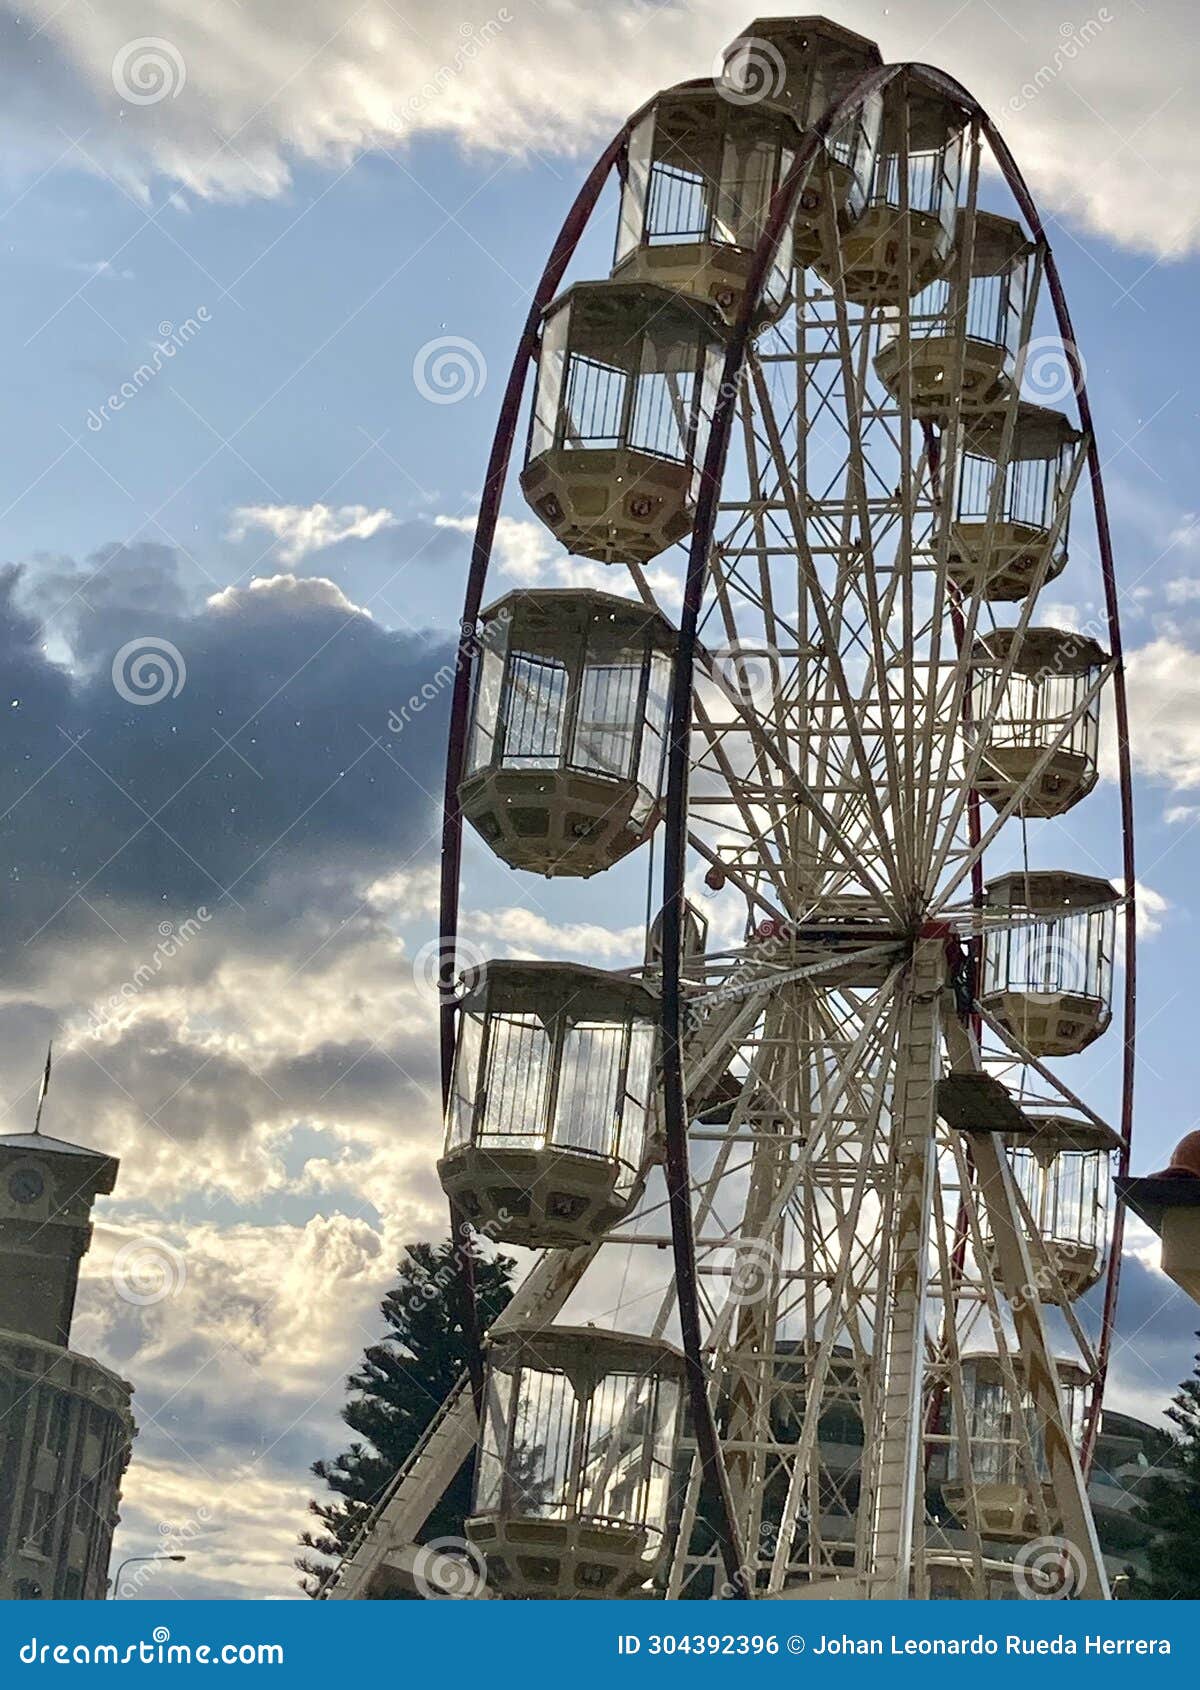 huge ferris wheel, on a sunny day with blue sky and clouds